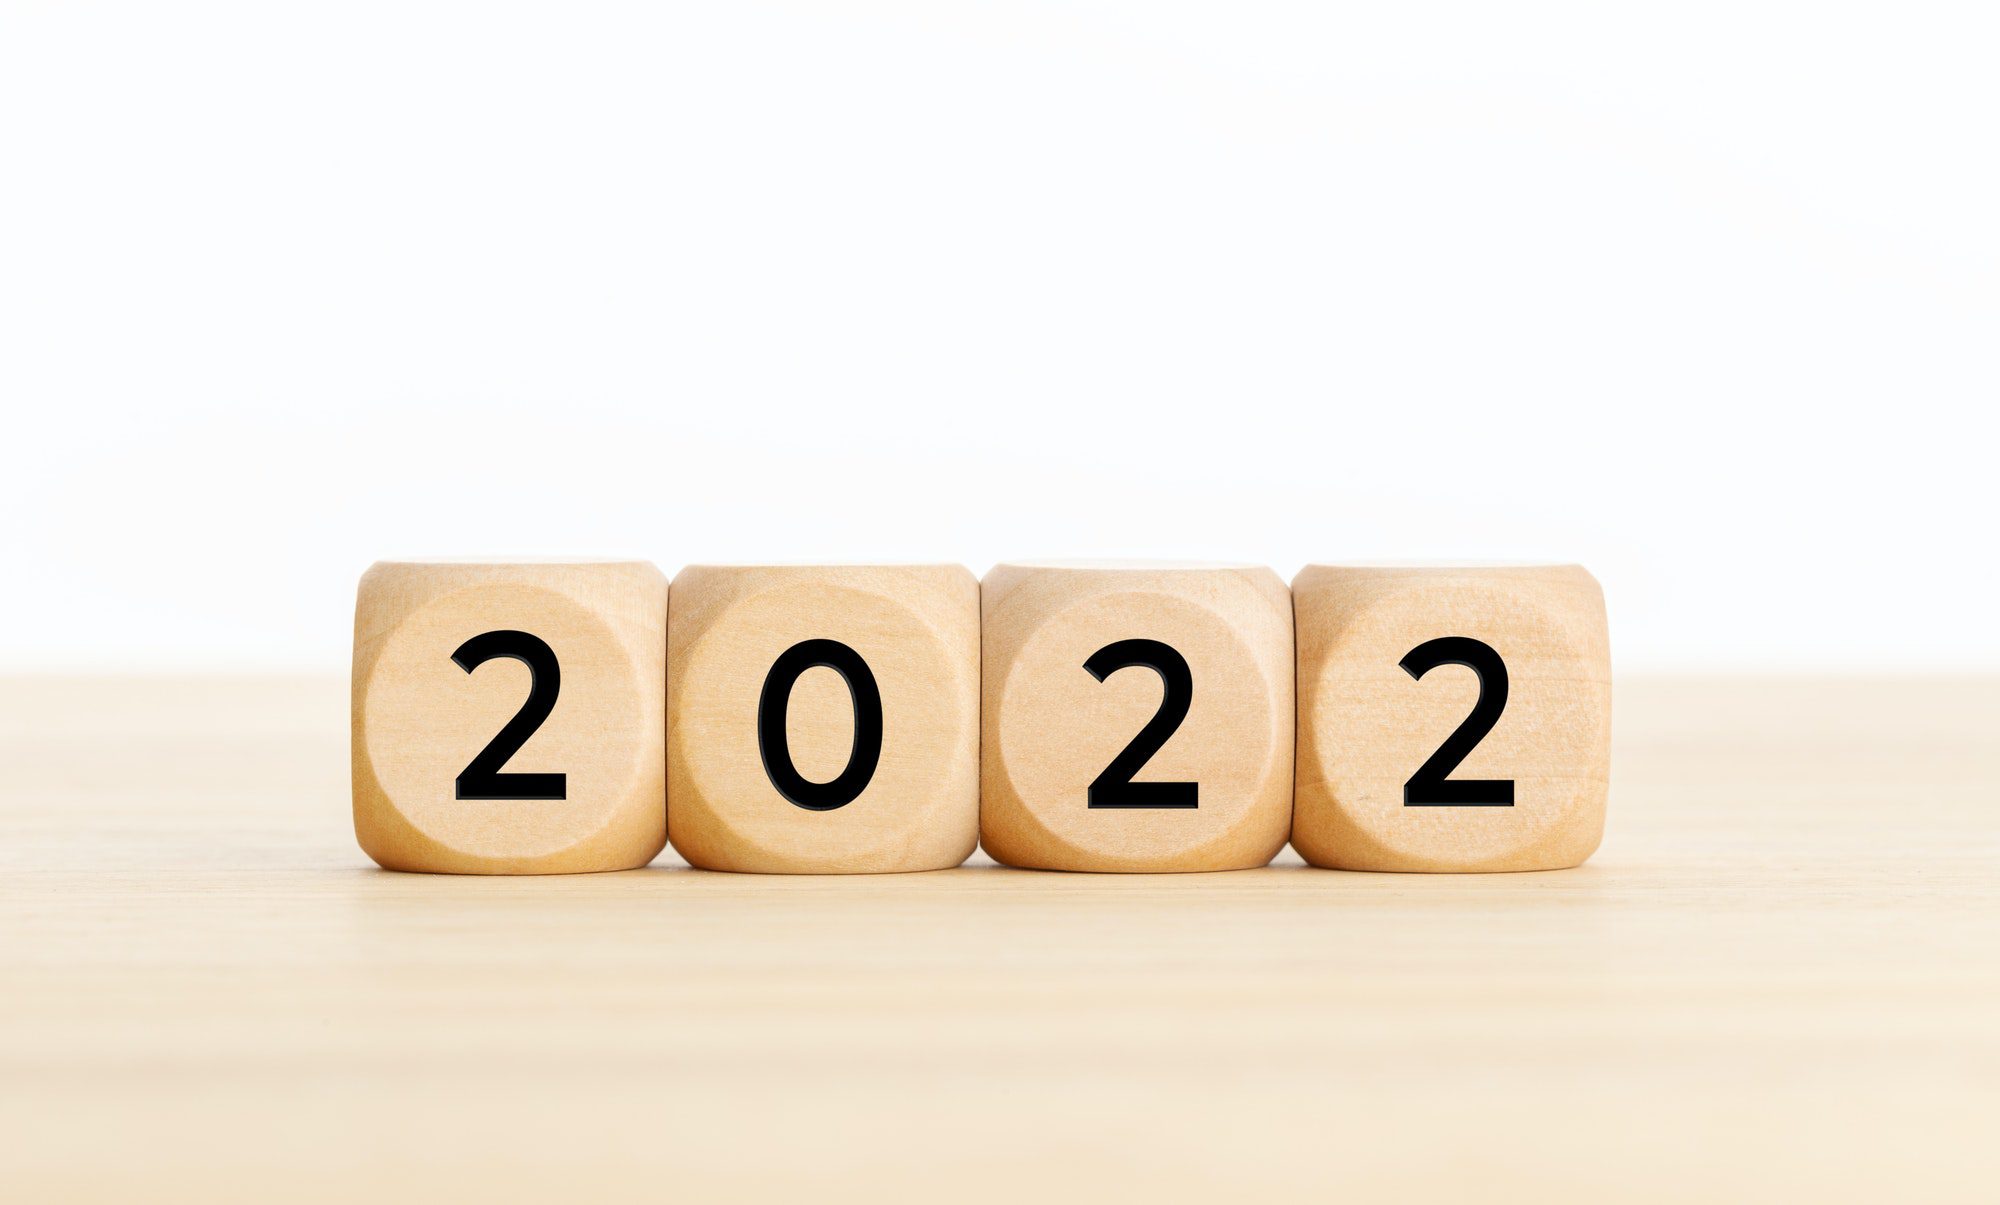 2022 letters representing the 2022 Medicare changes.